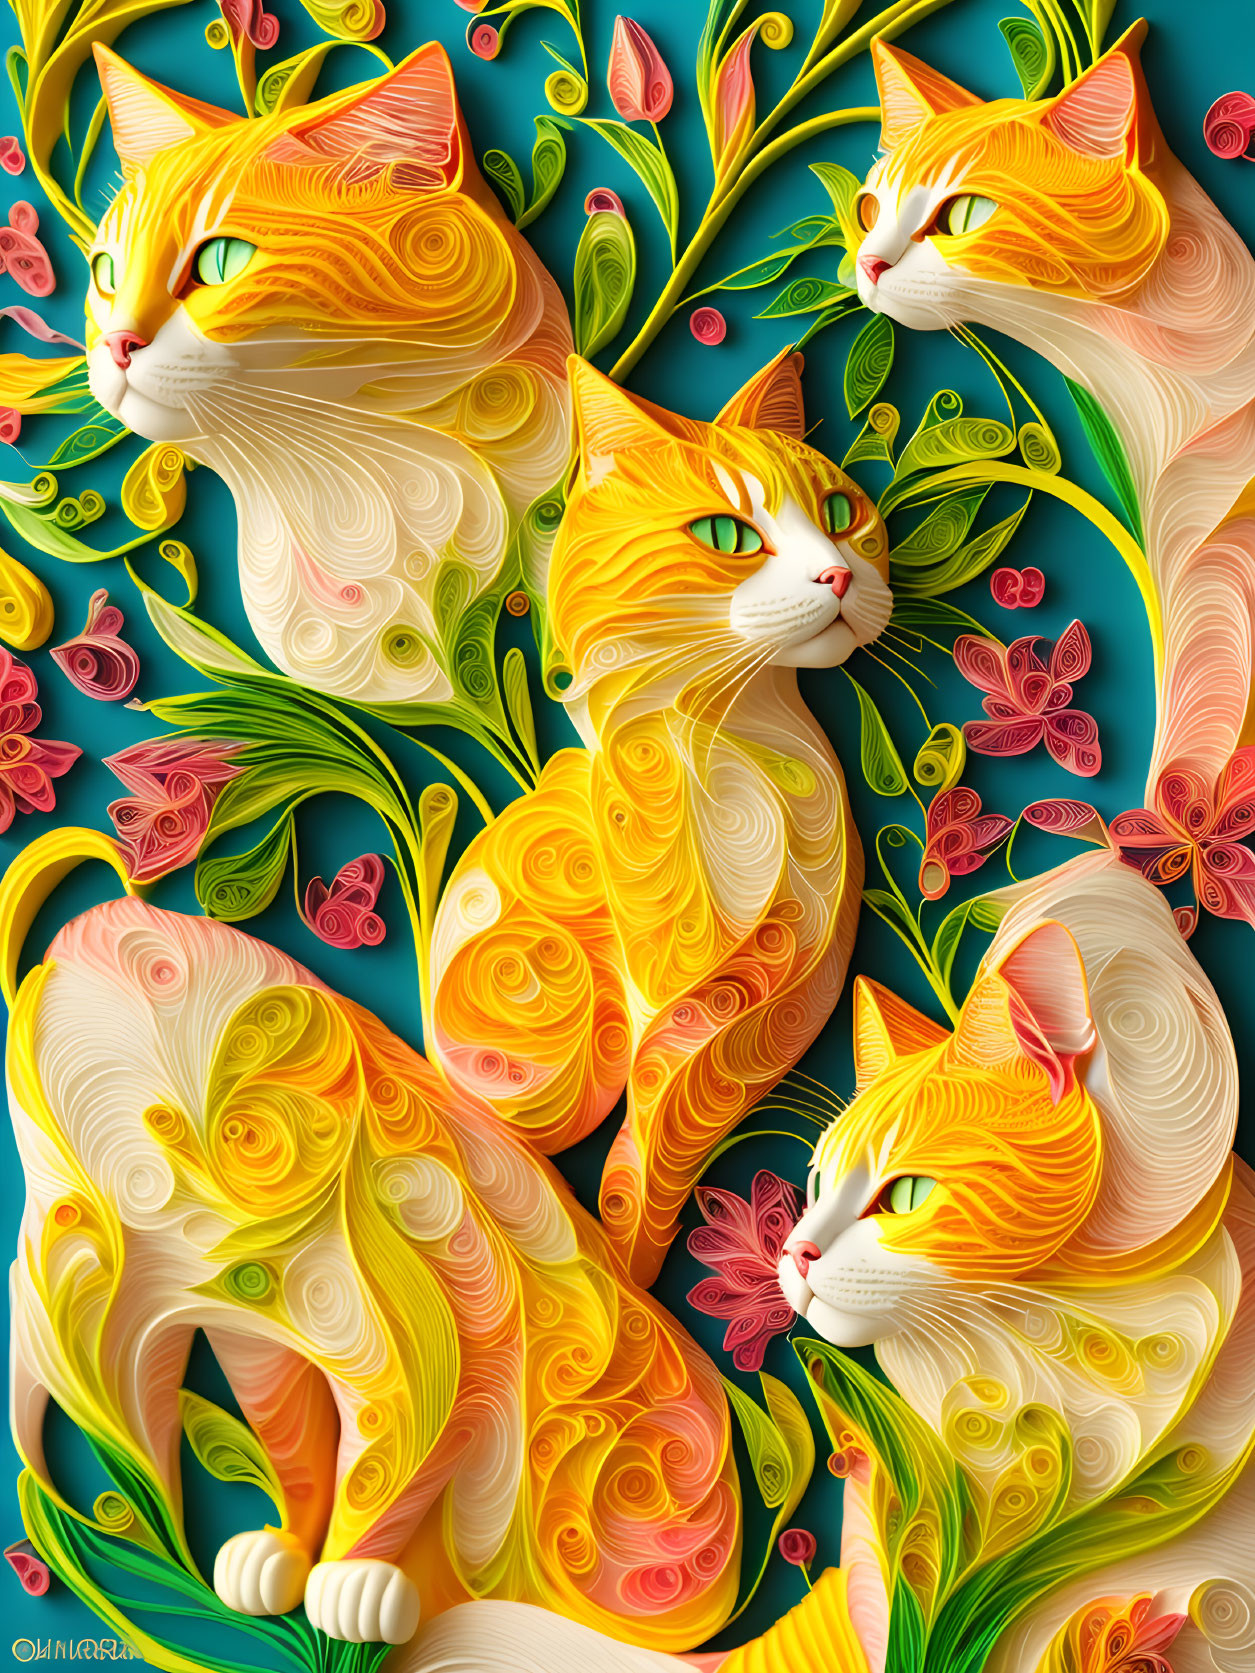 Colorful Illustration of Orange and Yellow Cats with Quilled Greenery and Flowers